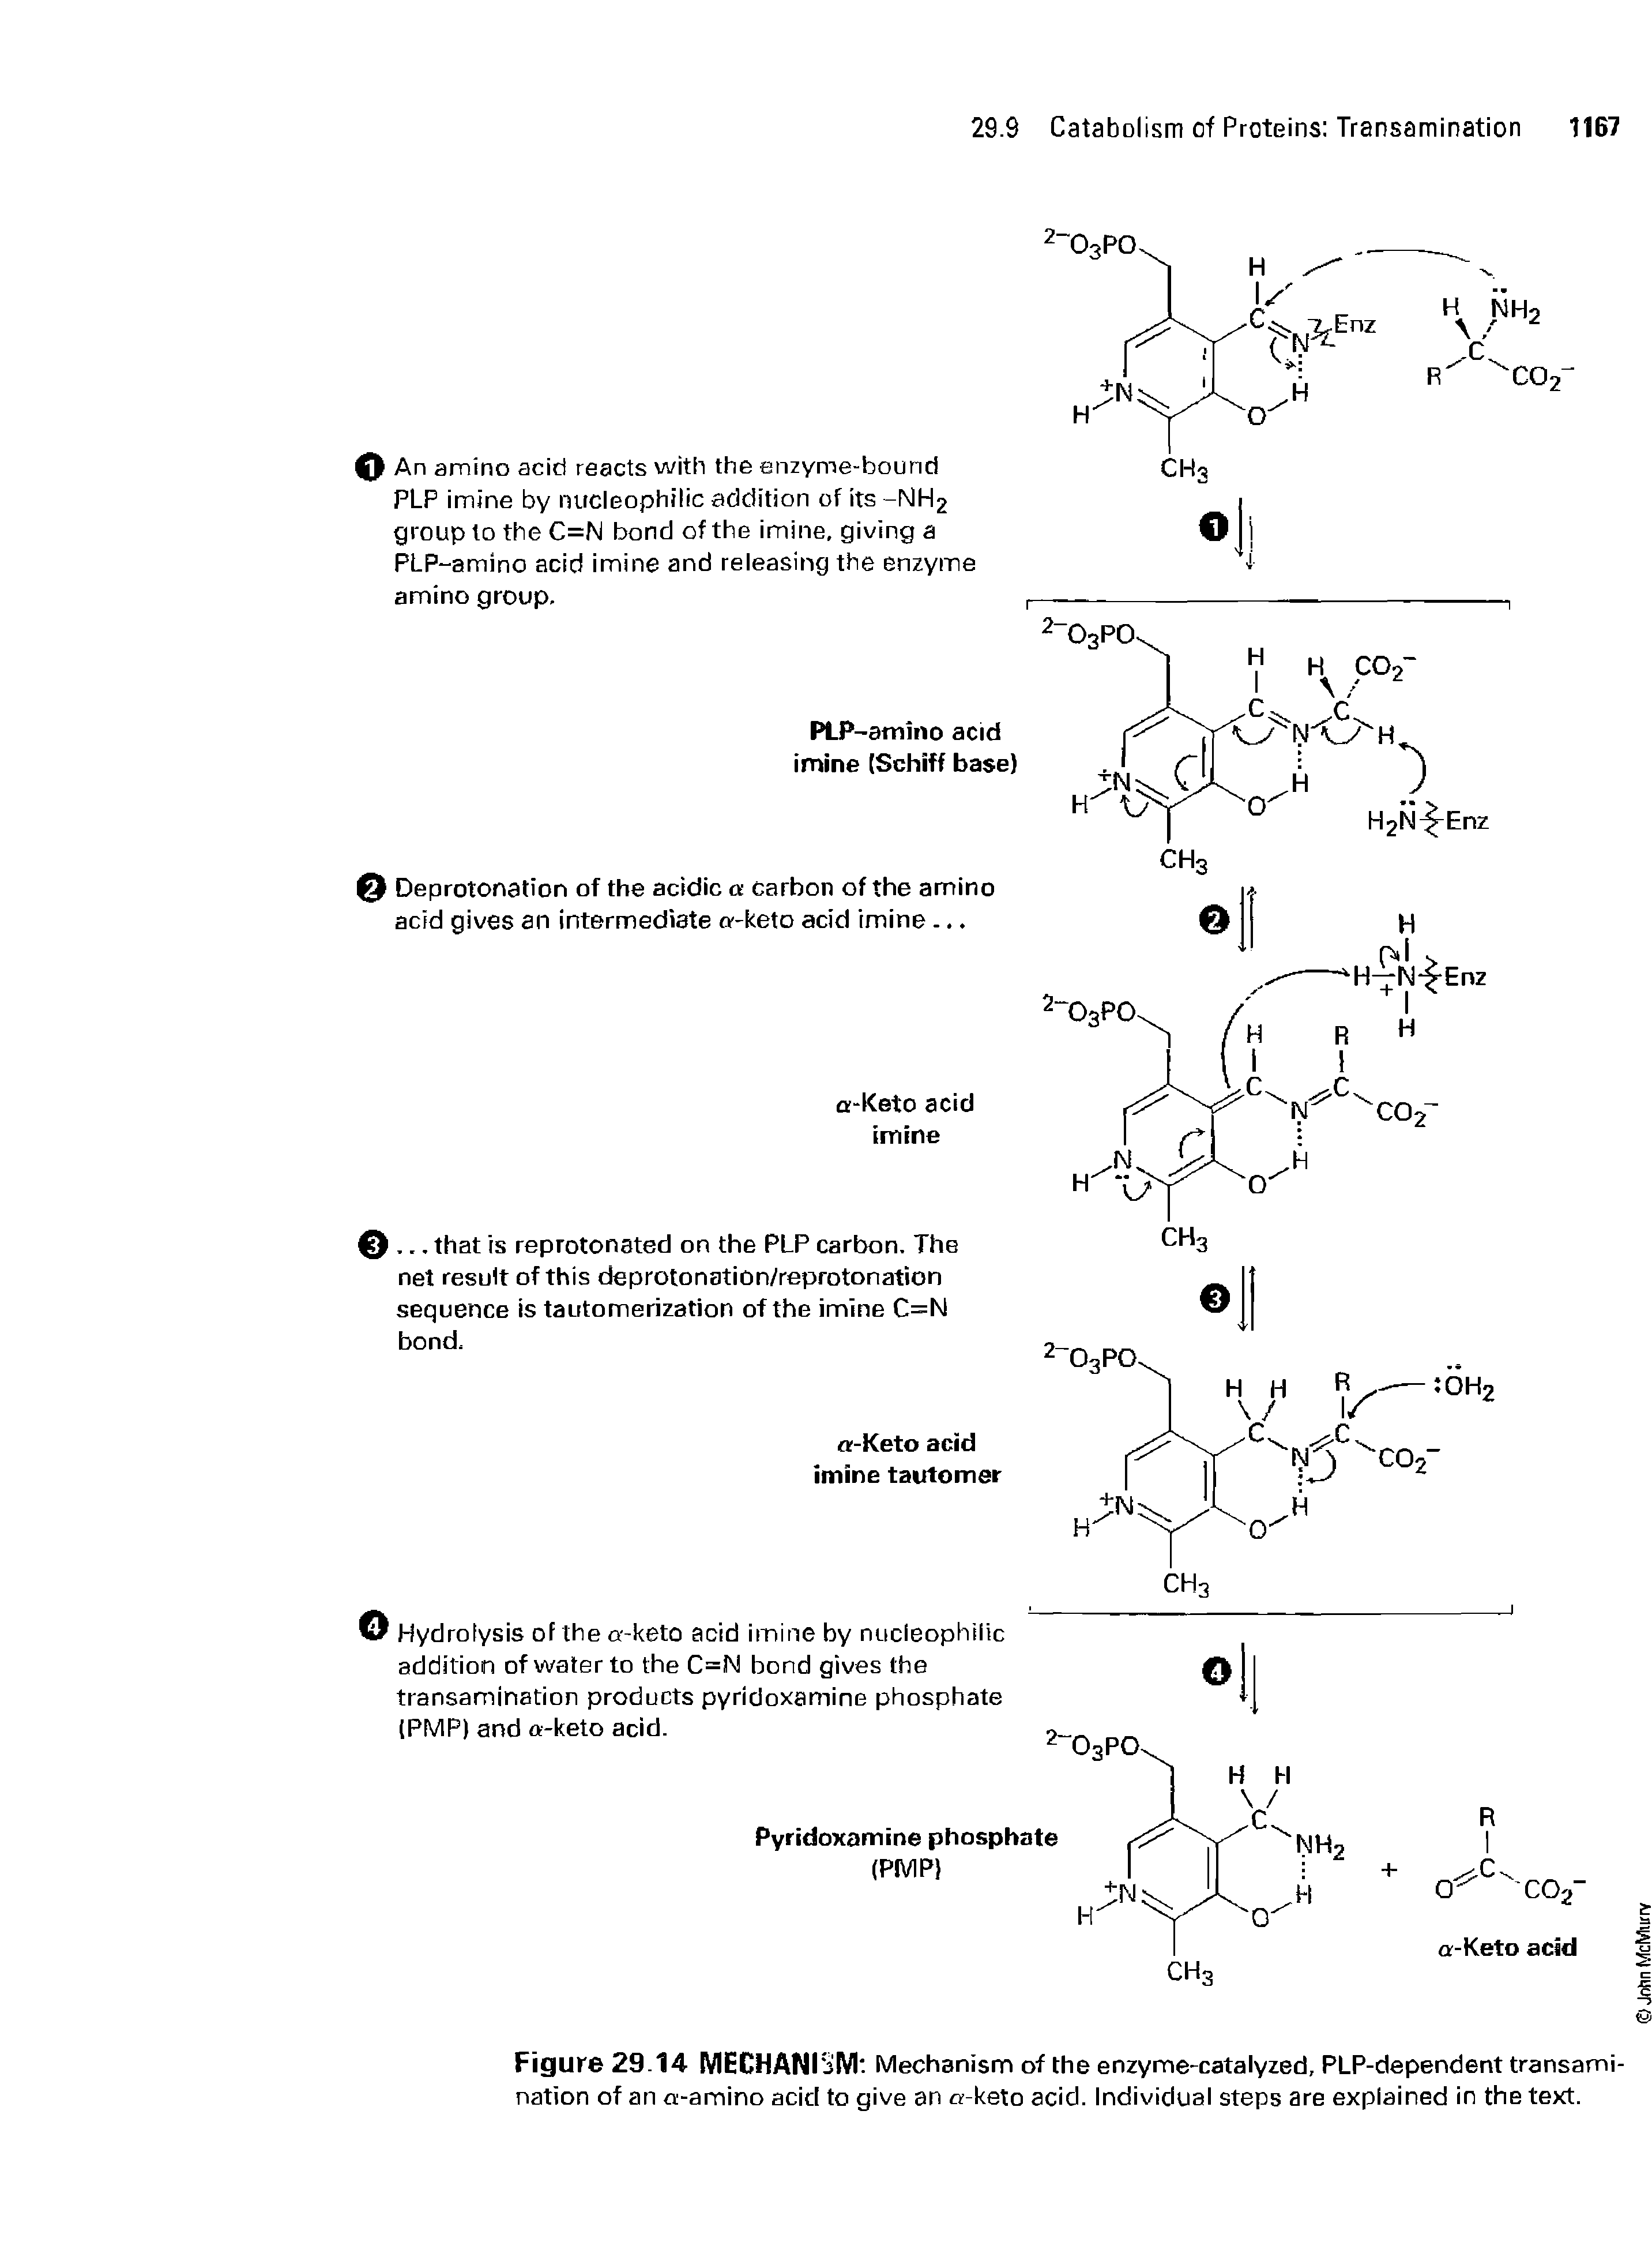 Figure 29 14 MECHANISM Mechanism of the enzyme-catalyzed, PLP-dependent transamination of an a-amino acid to give an a-keto acid. Individual steps are explained in the text.